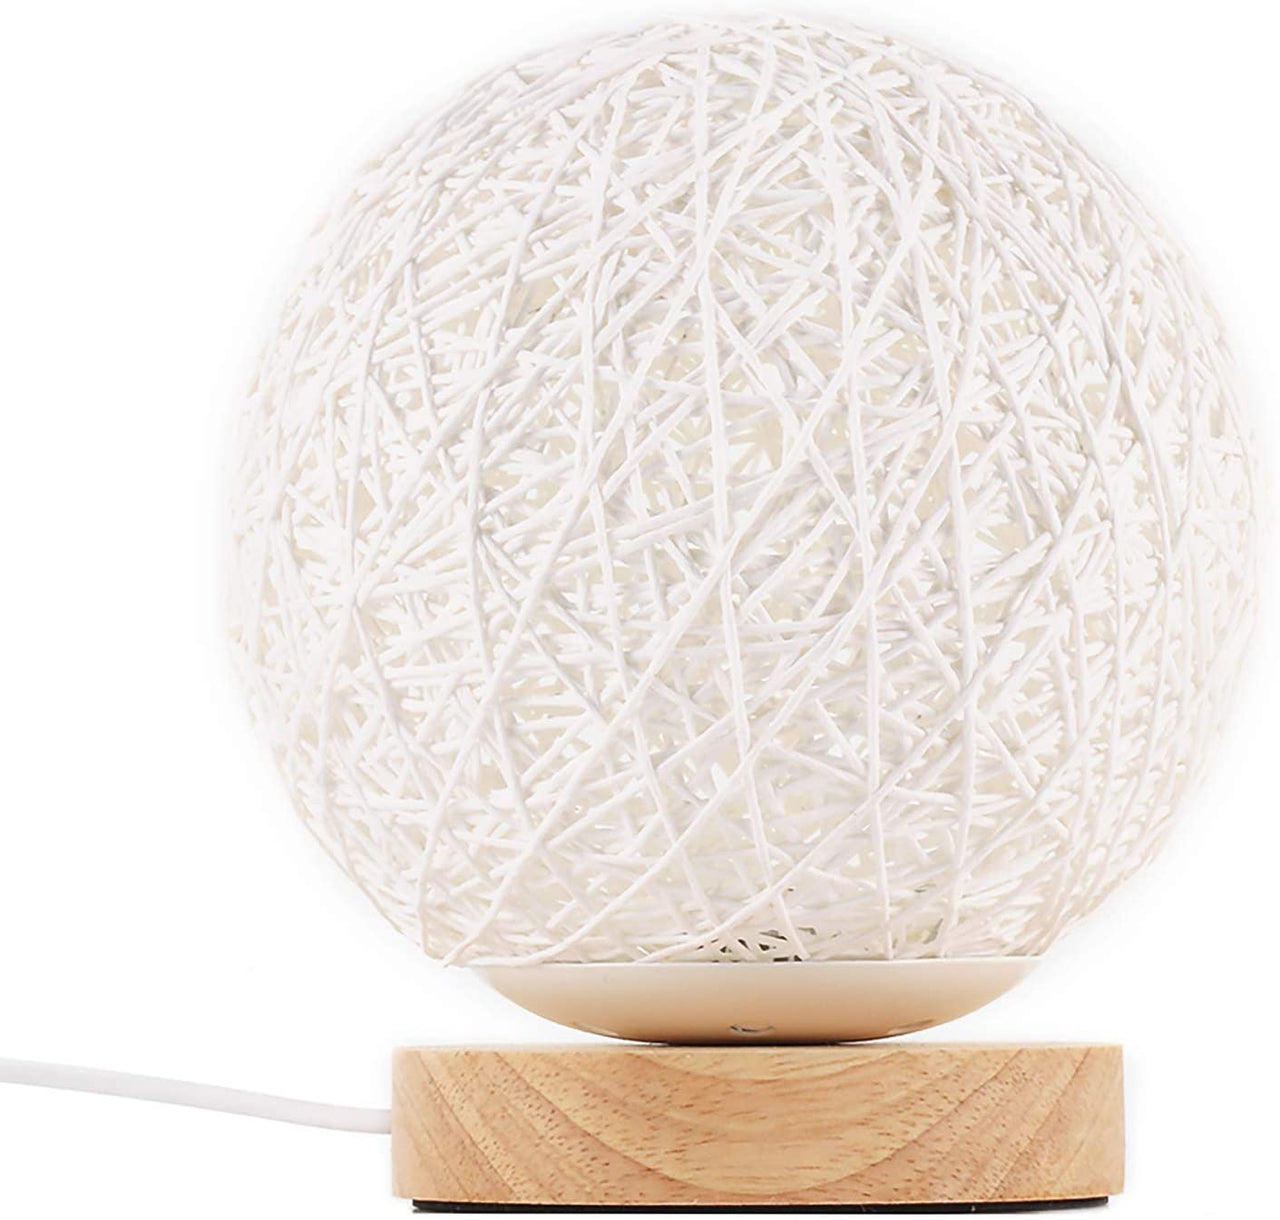 Wooden Moon Lamp - USB Charger - Bedside Table Decor